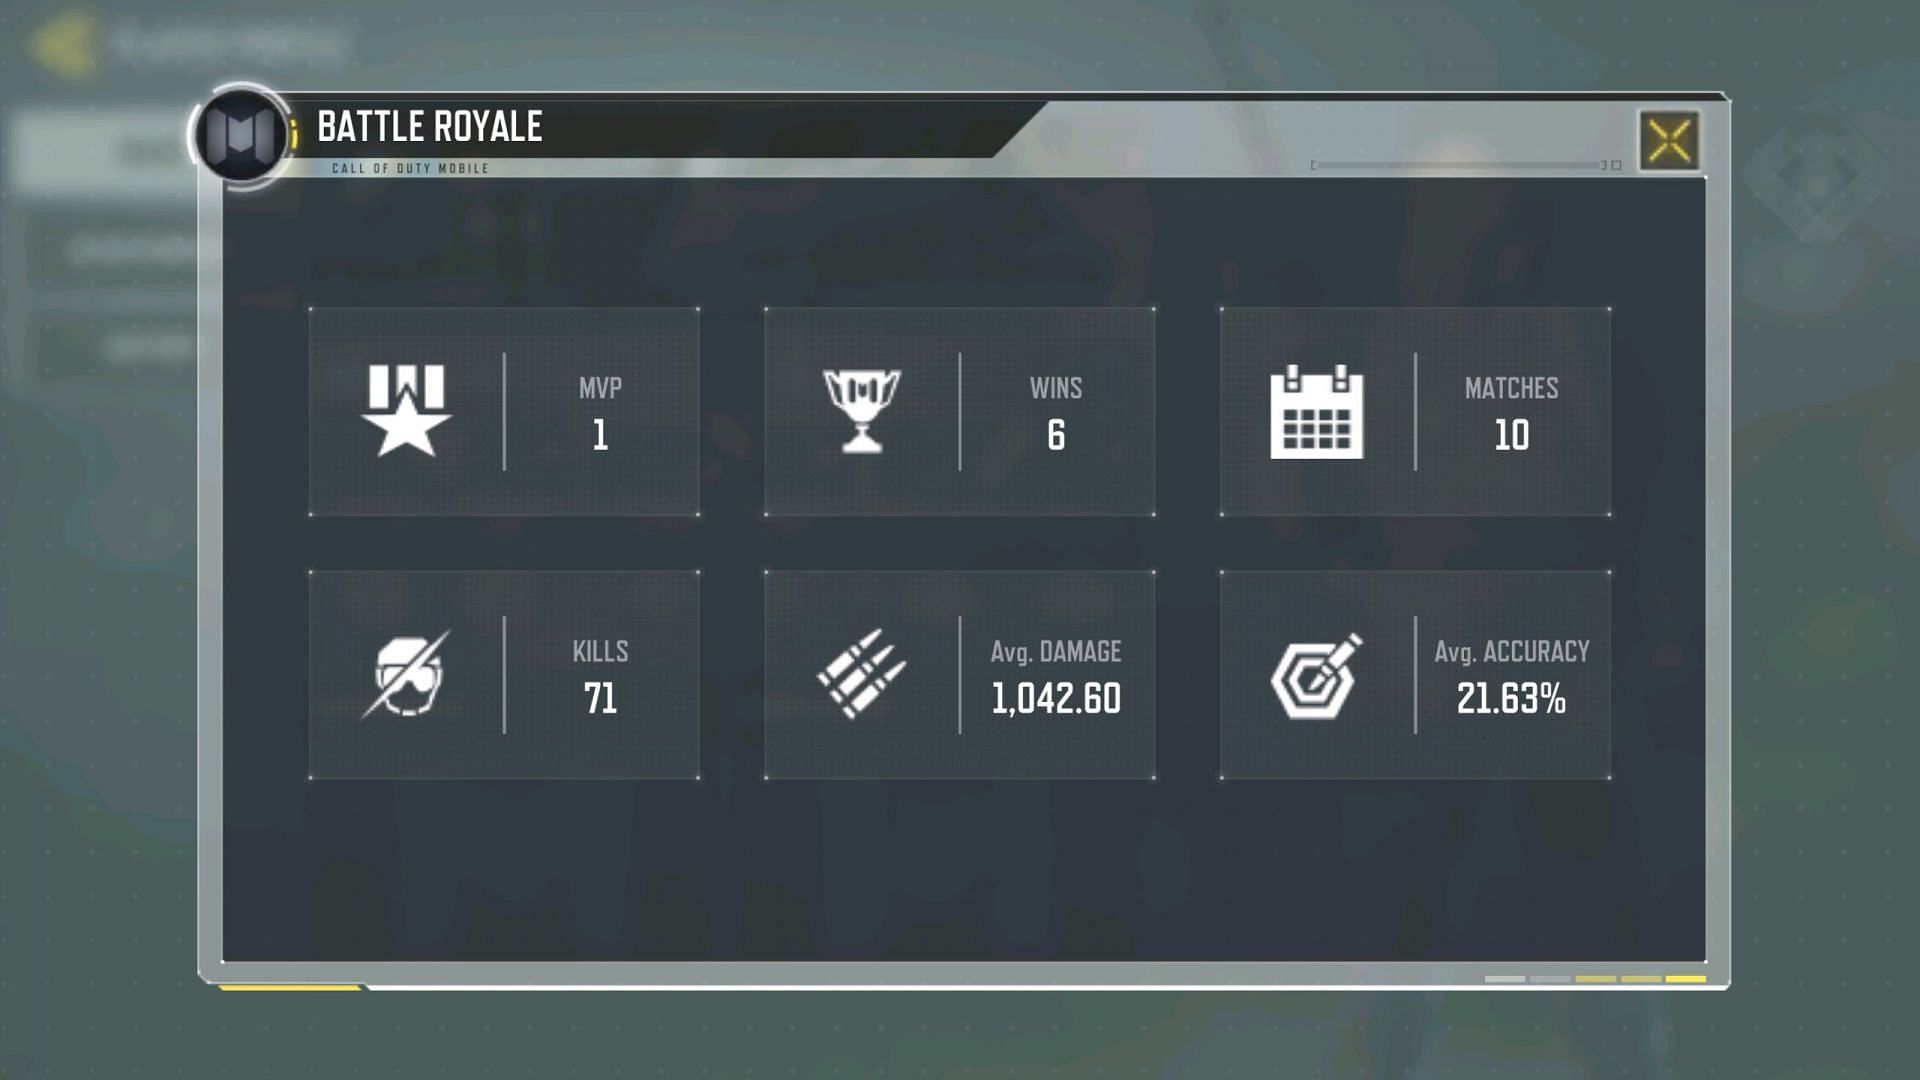 Piyush Joshi also has great stats in the Battle Royale mode (Image via Activision)